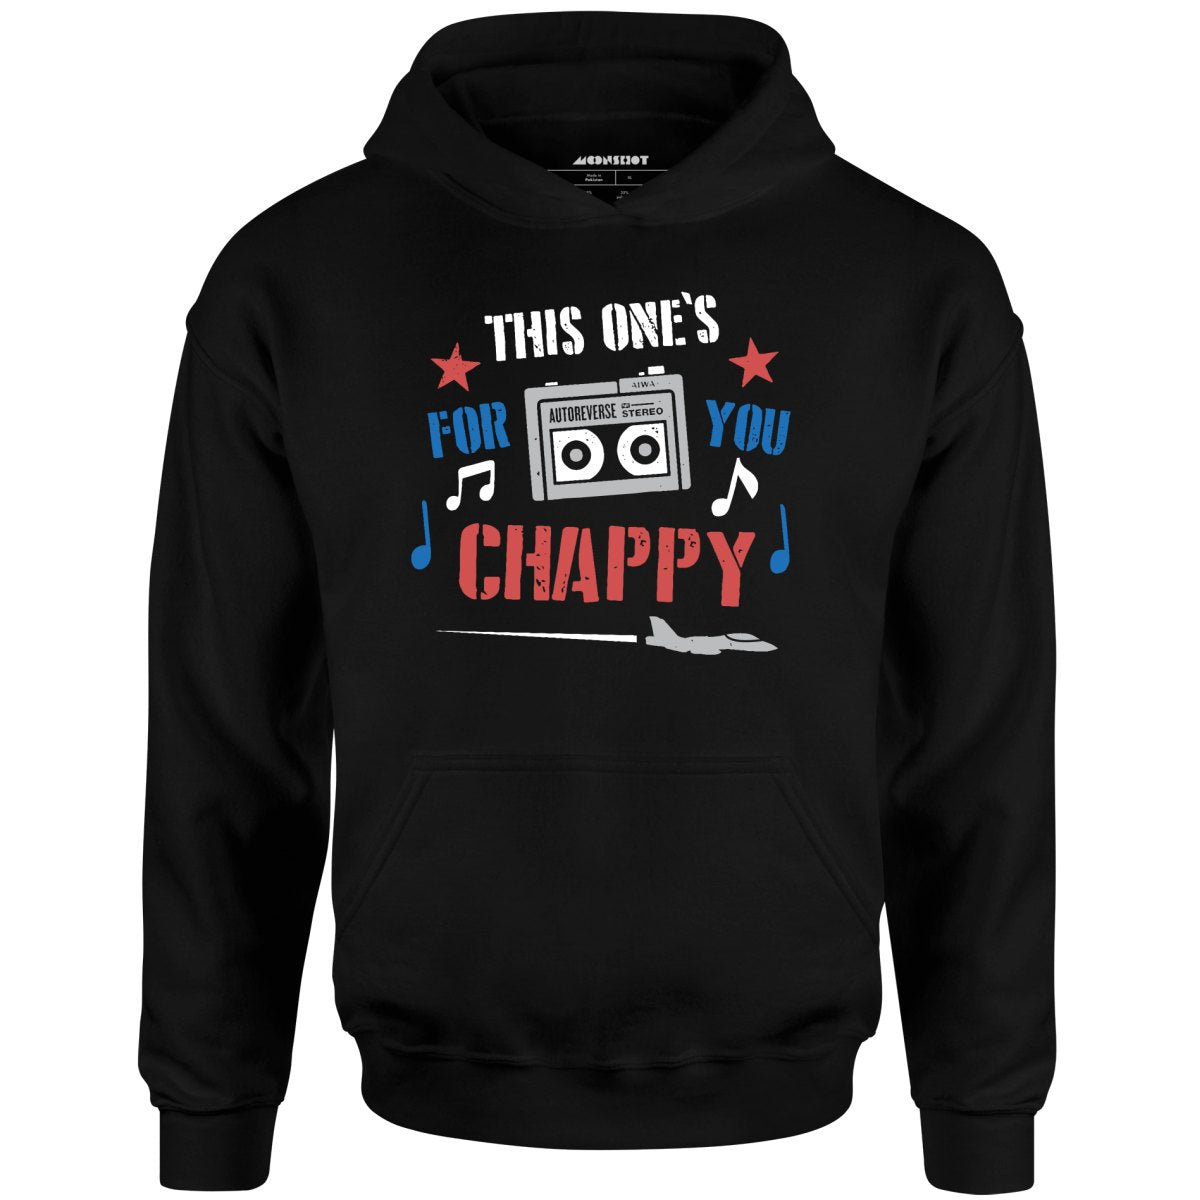 This One's For You Chappy - Iron Eagle - Unisex Hoodie